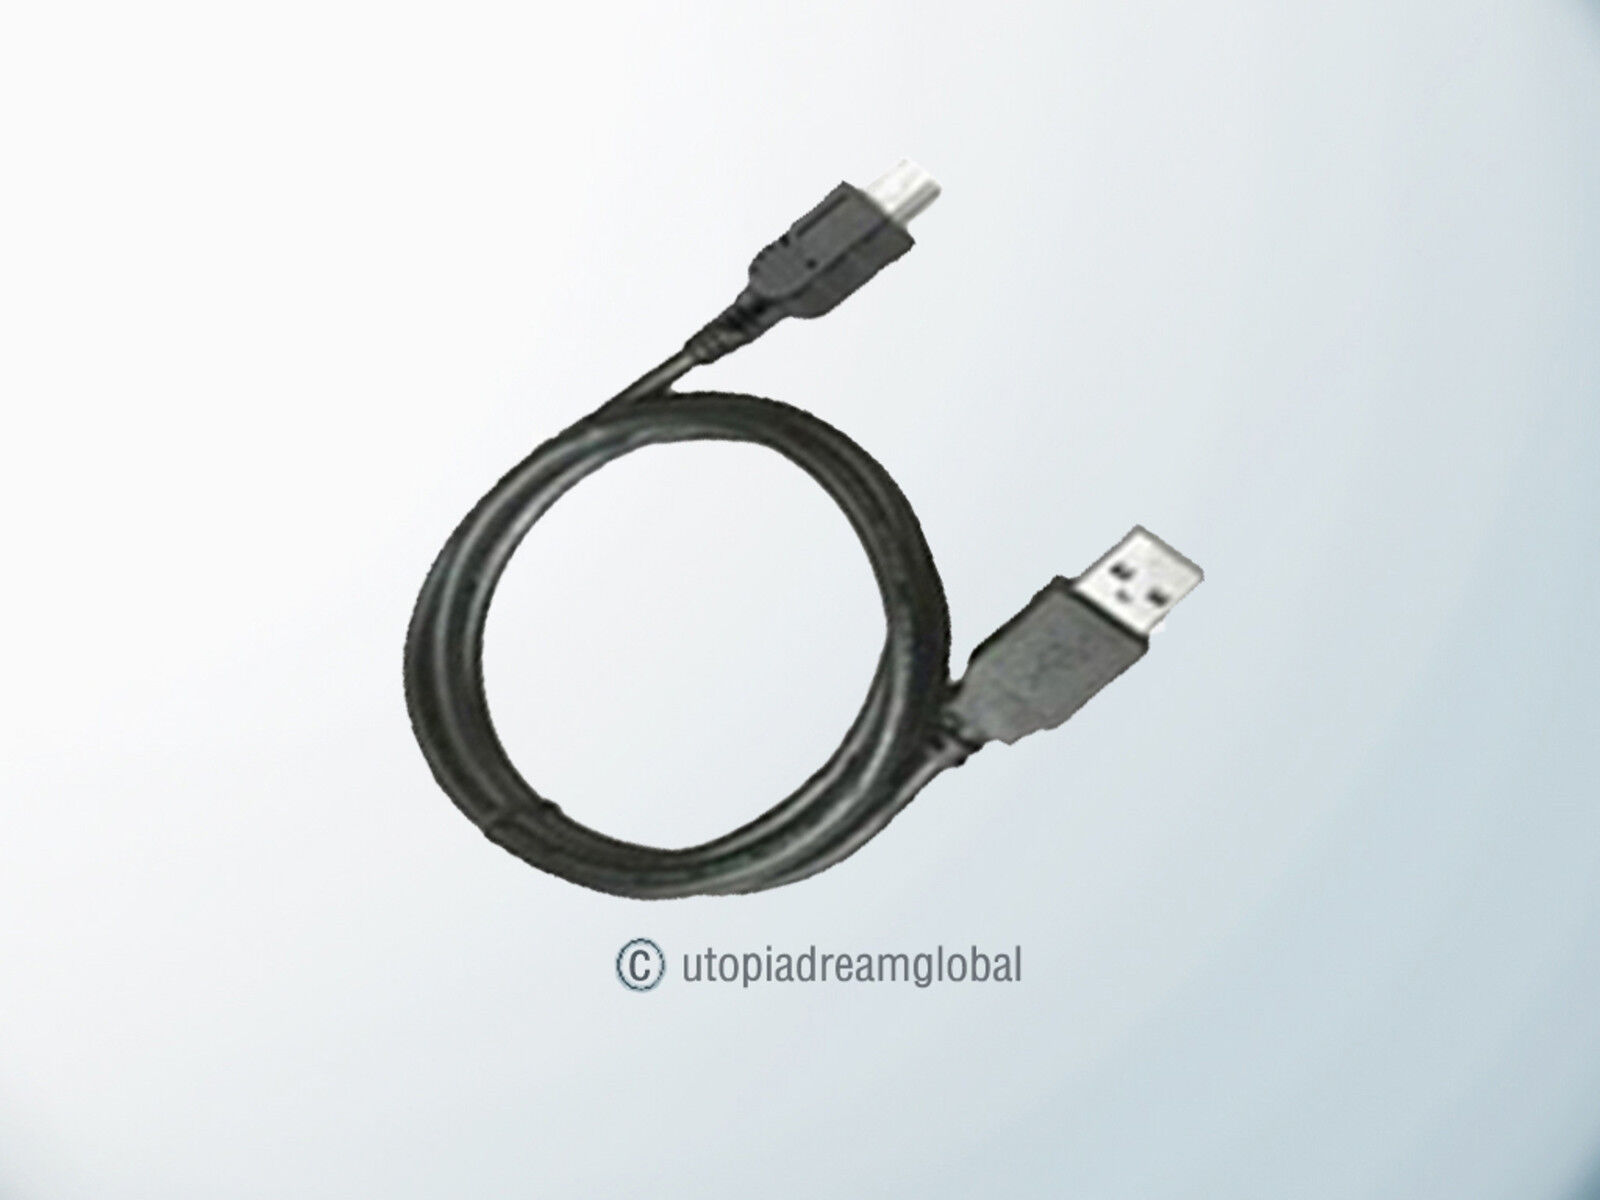 Great Choice Products Micro Usb Charging Cable Cord Lead For Nabi Big Tab Hd24 Hd 24